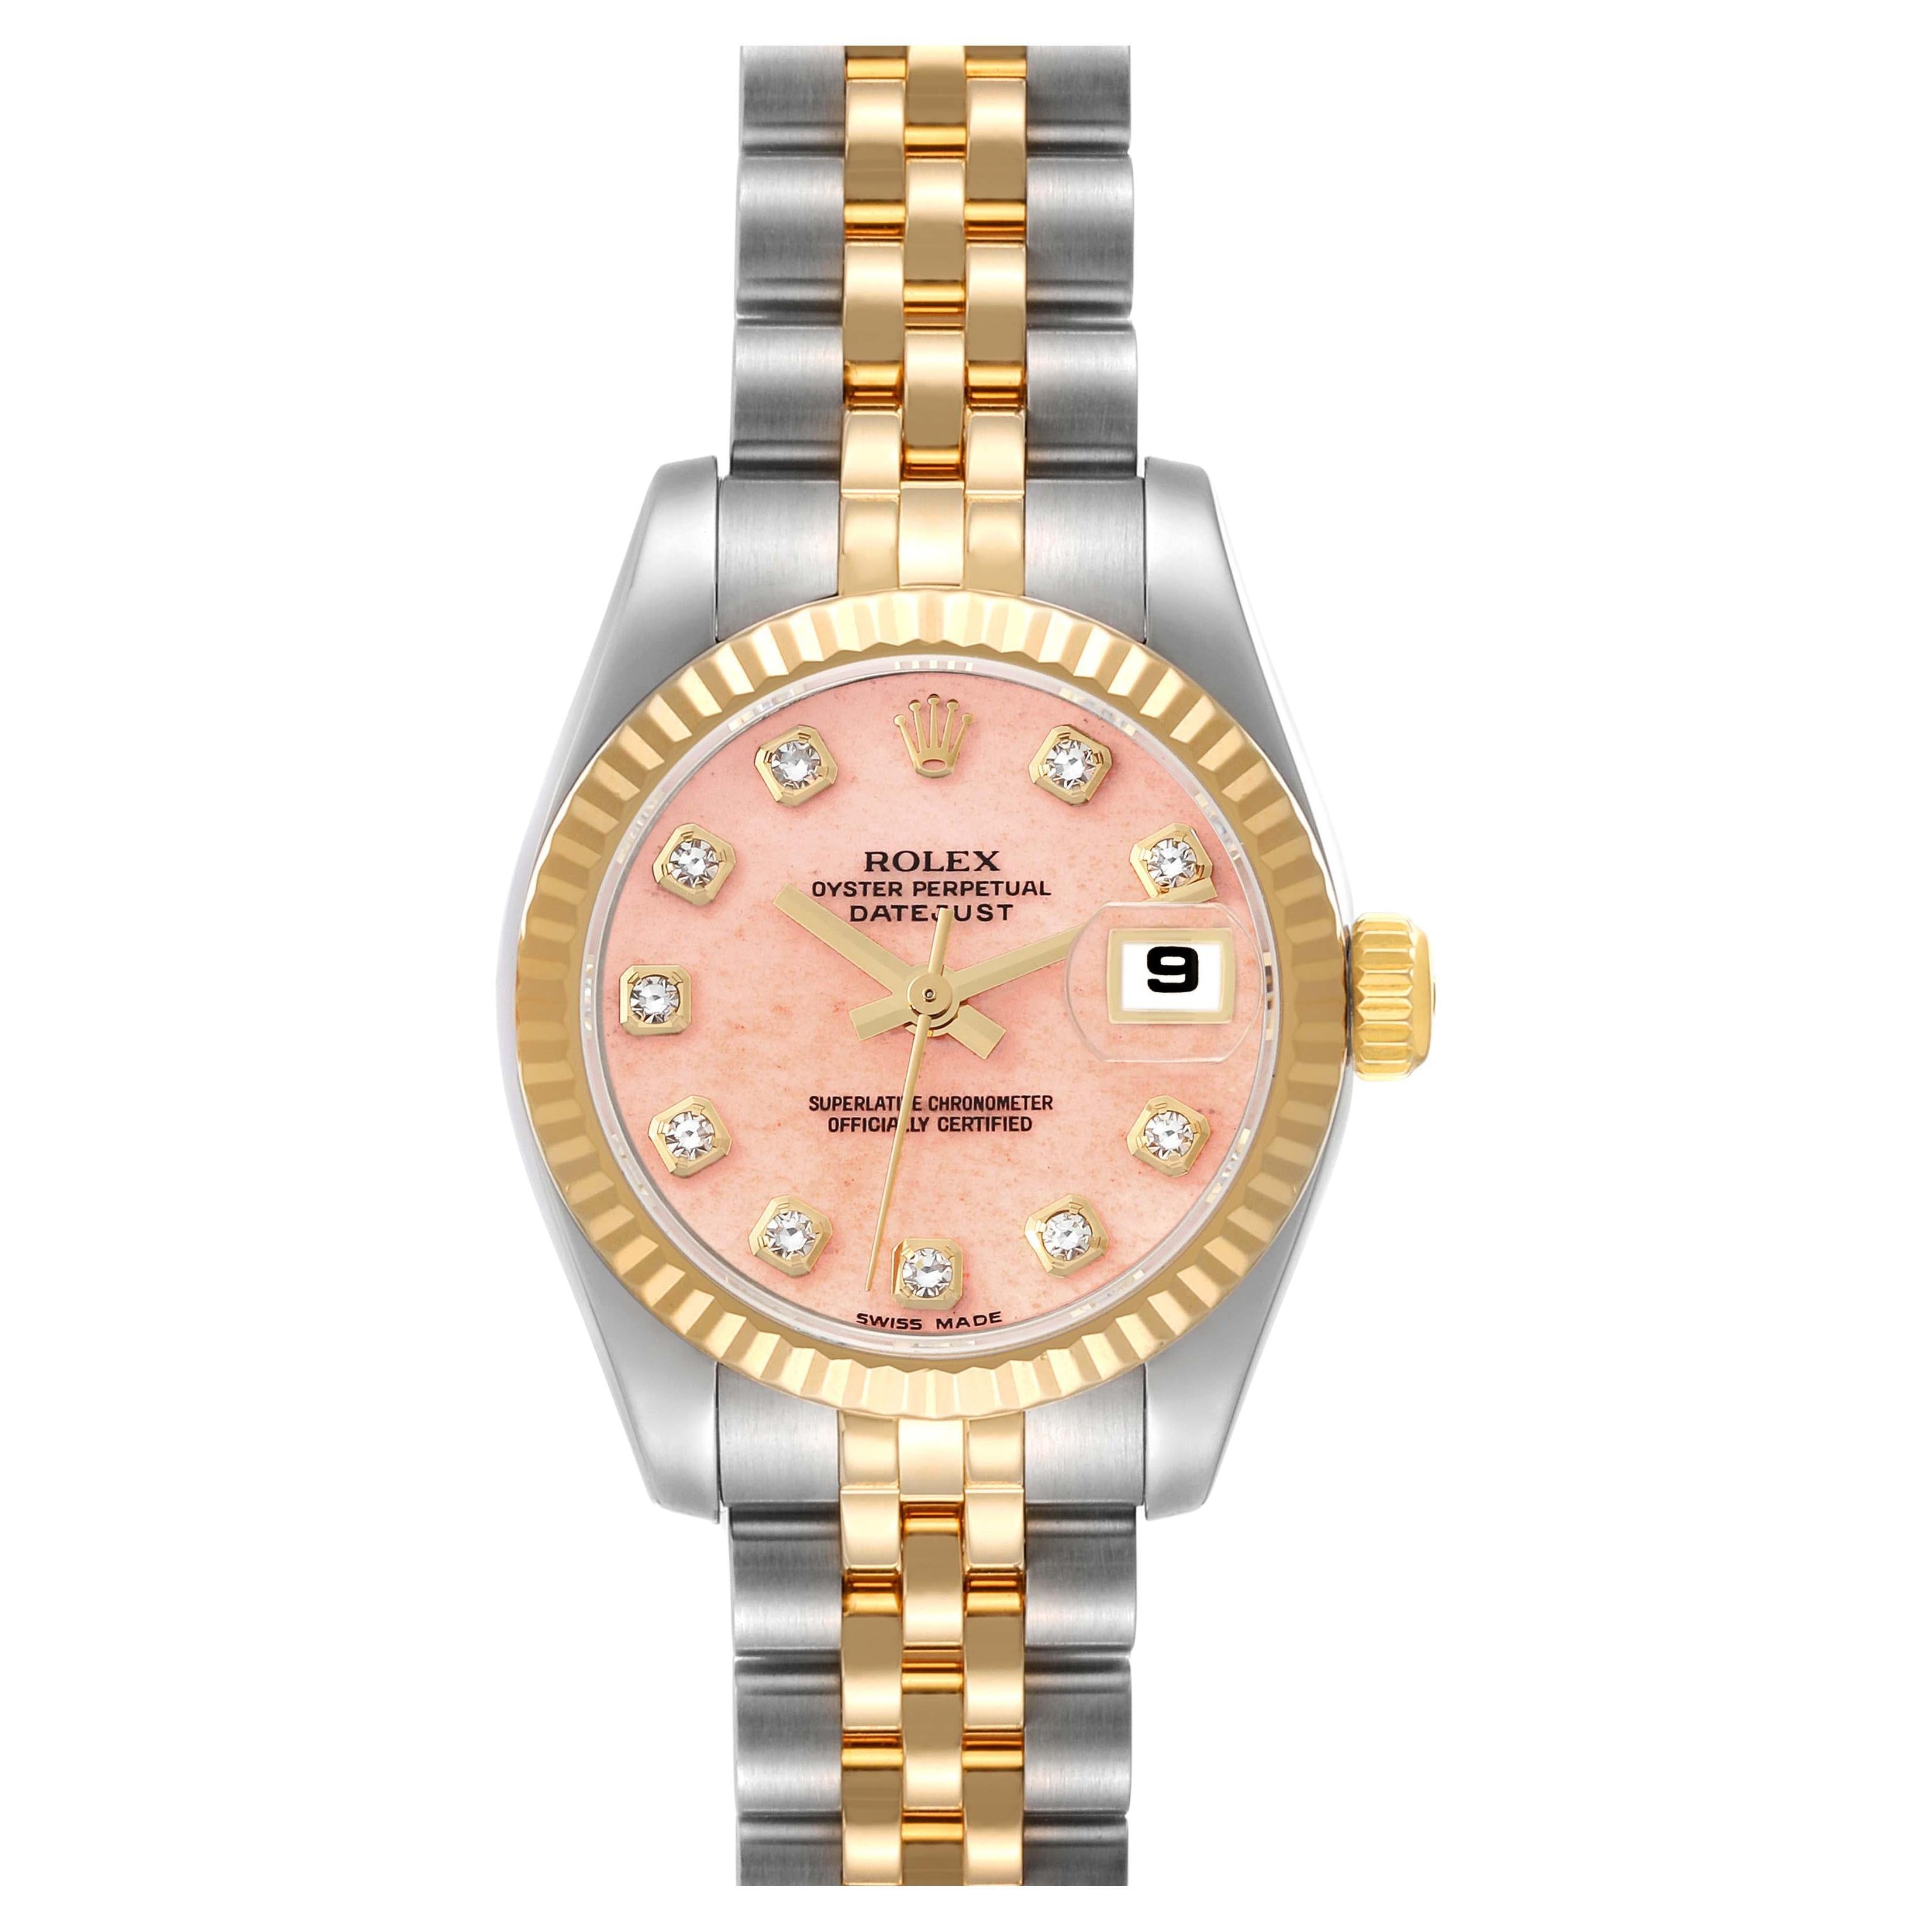 Rolex Datejust Steel Yellow Gold Coral Diamond Dial Ladies Watch 179173